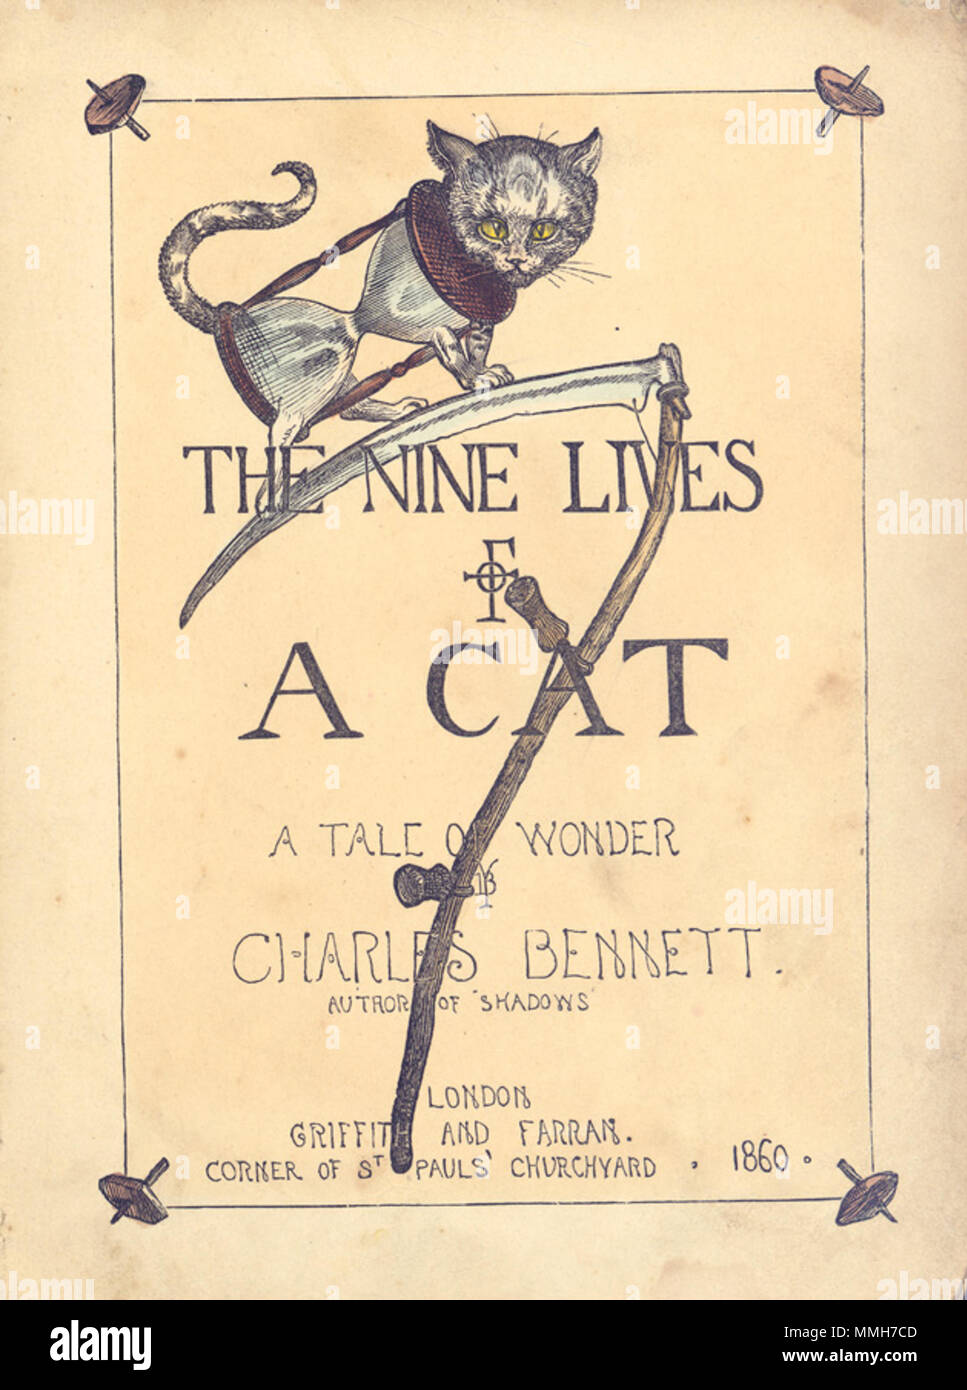 . English: Cover of The Nine Lives of a Cat: A Tale of Wonder - Published by Griffith and Farran, London.  . 1860.   Charles H. Bennett  (1829–1867)      Alternative names Charles H. Bennett  Description British illustrator and caricaturist Victorian-age illustrator who pioneered techniques in comic illustration  Date of birth/death 1829 1867  Location of birth/death London London  Work period 1853-1867  Work location England  Authority control  : Q5078521 VIAF:?100208670 ISNI:?0000 0001 1691 6935 ULAN:?500009448 LCCN:?n85145312 NLA:?35017367 WorldCat Charles H. Bennett (illustrator) (39960147 Stock Photo